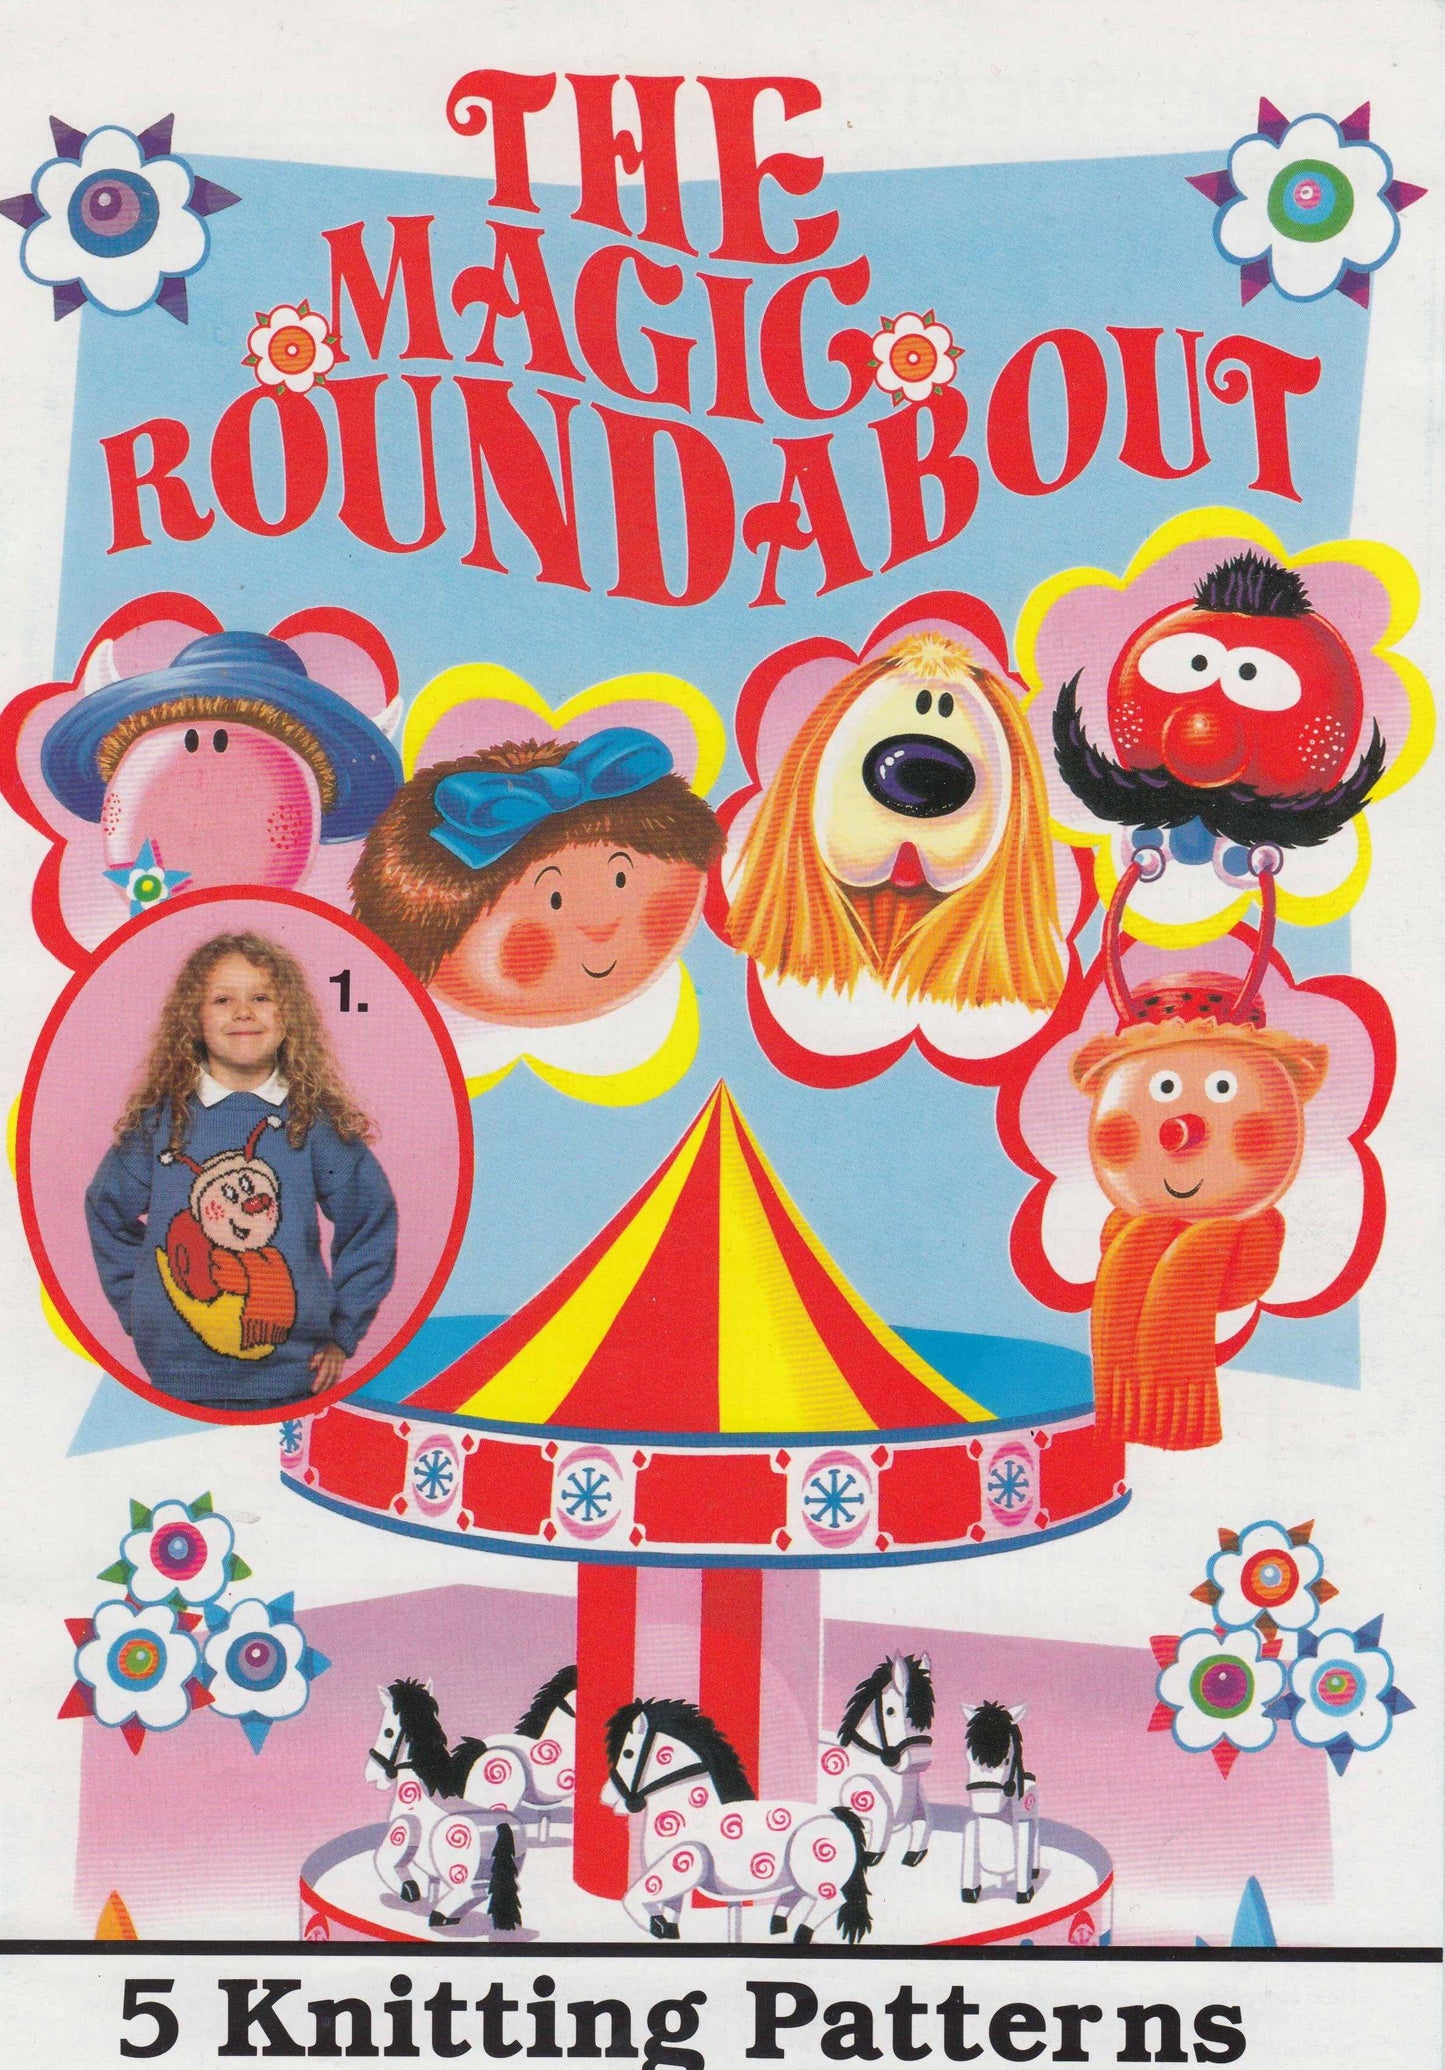  Magic Roundabout Vintage Knitting Pattern by Cross Stitch Chart Heaven sold by Free Spirit Accessories